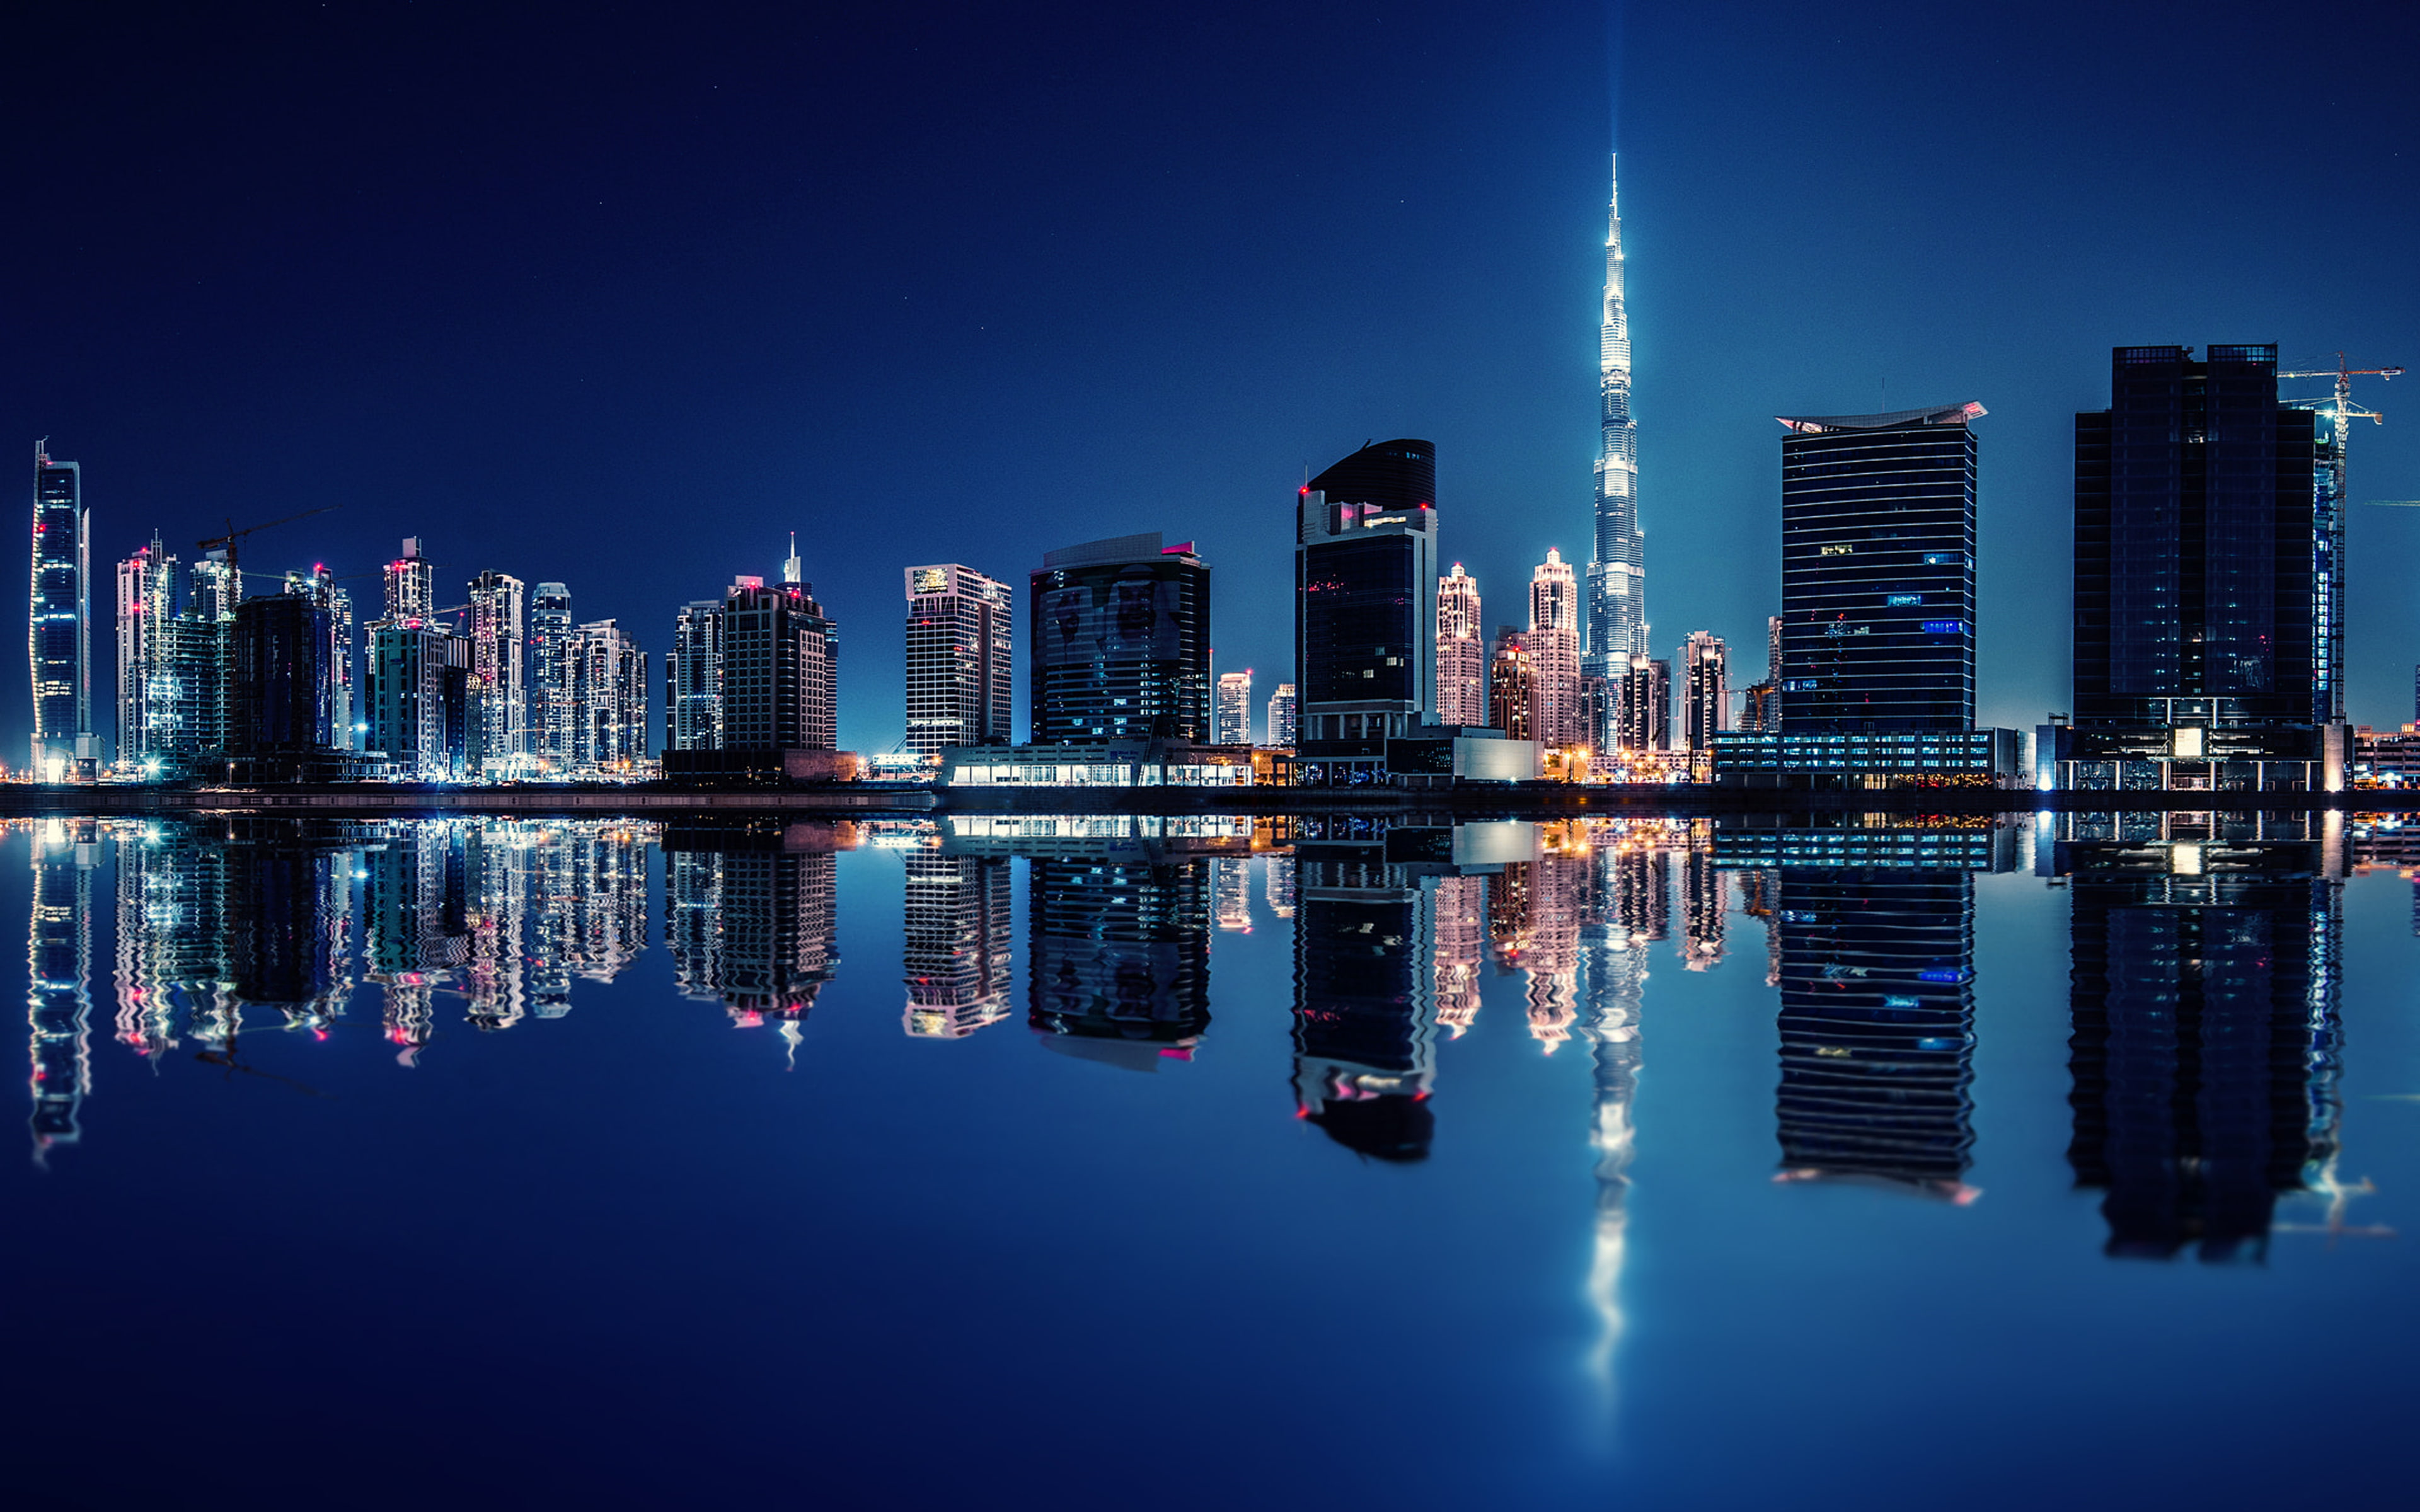 United Arab Emirates Dubai Reflection On Midnight 4k Ultra Hd Desktop Wallpapers For Computers Laptop Tablet And Mobile Phones 3840×2400